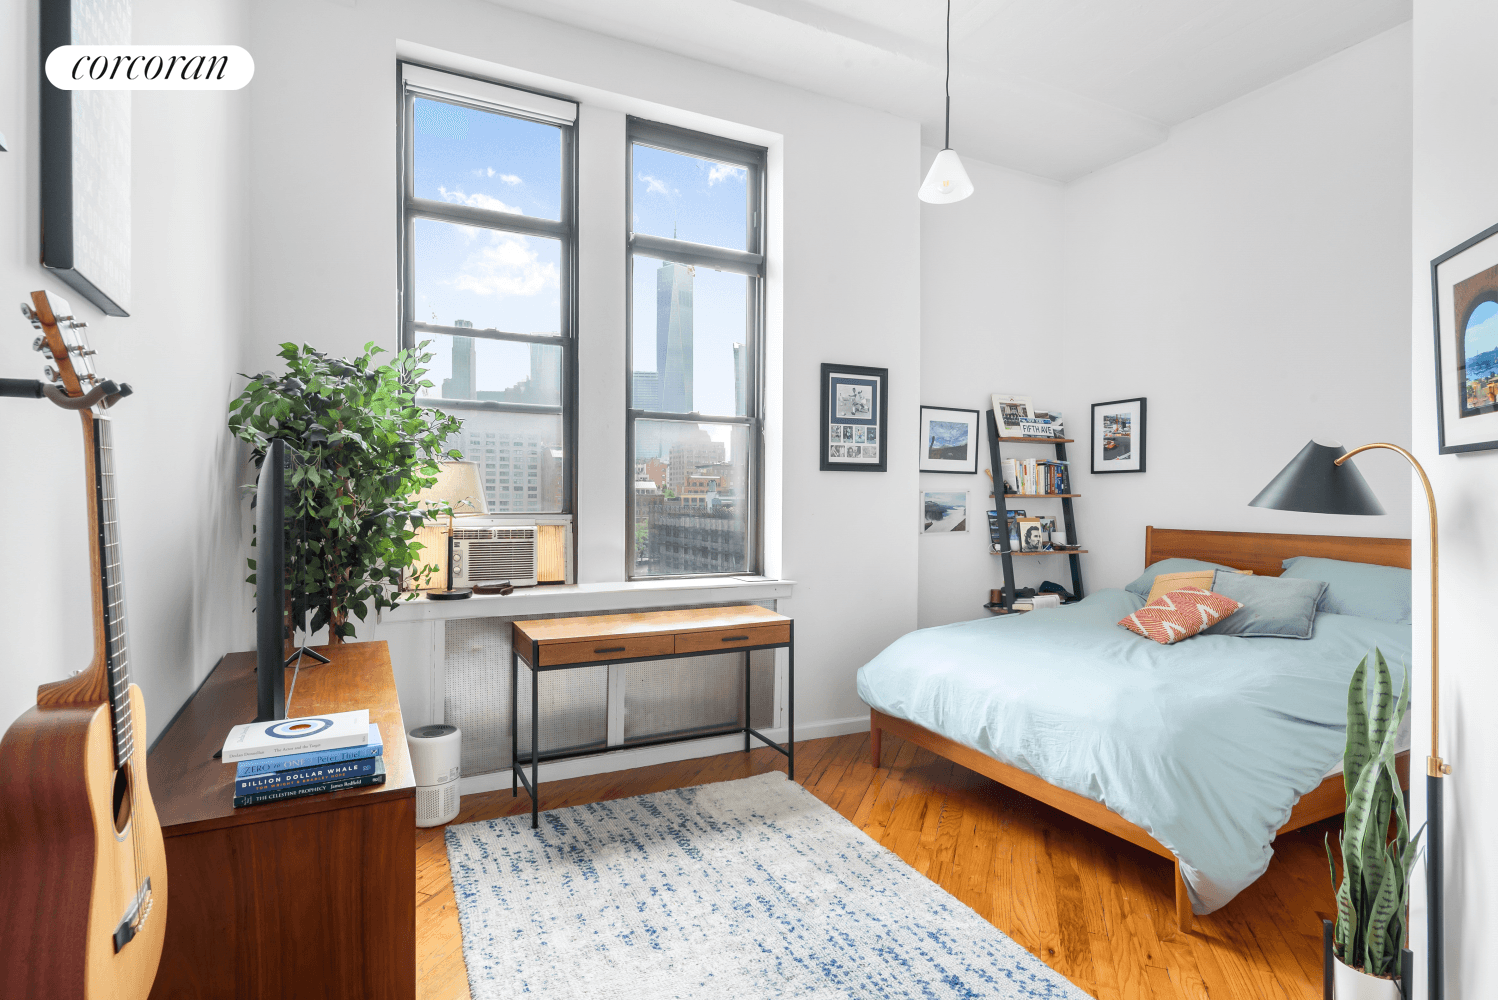 NEW TO MARKET ! Introducing a strikingly unique and fully renovated 2 bedroom loft nestled in the heart of Tribeca Soho.